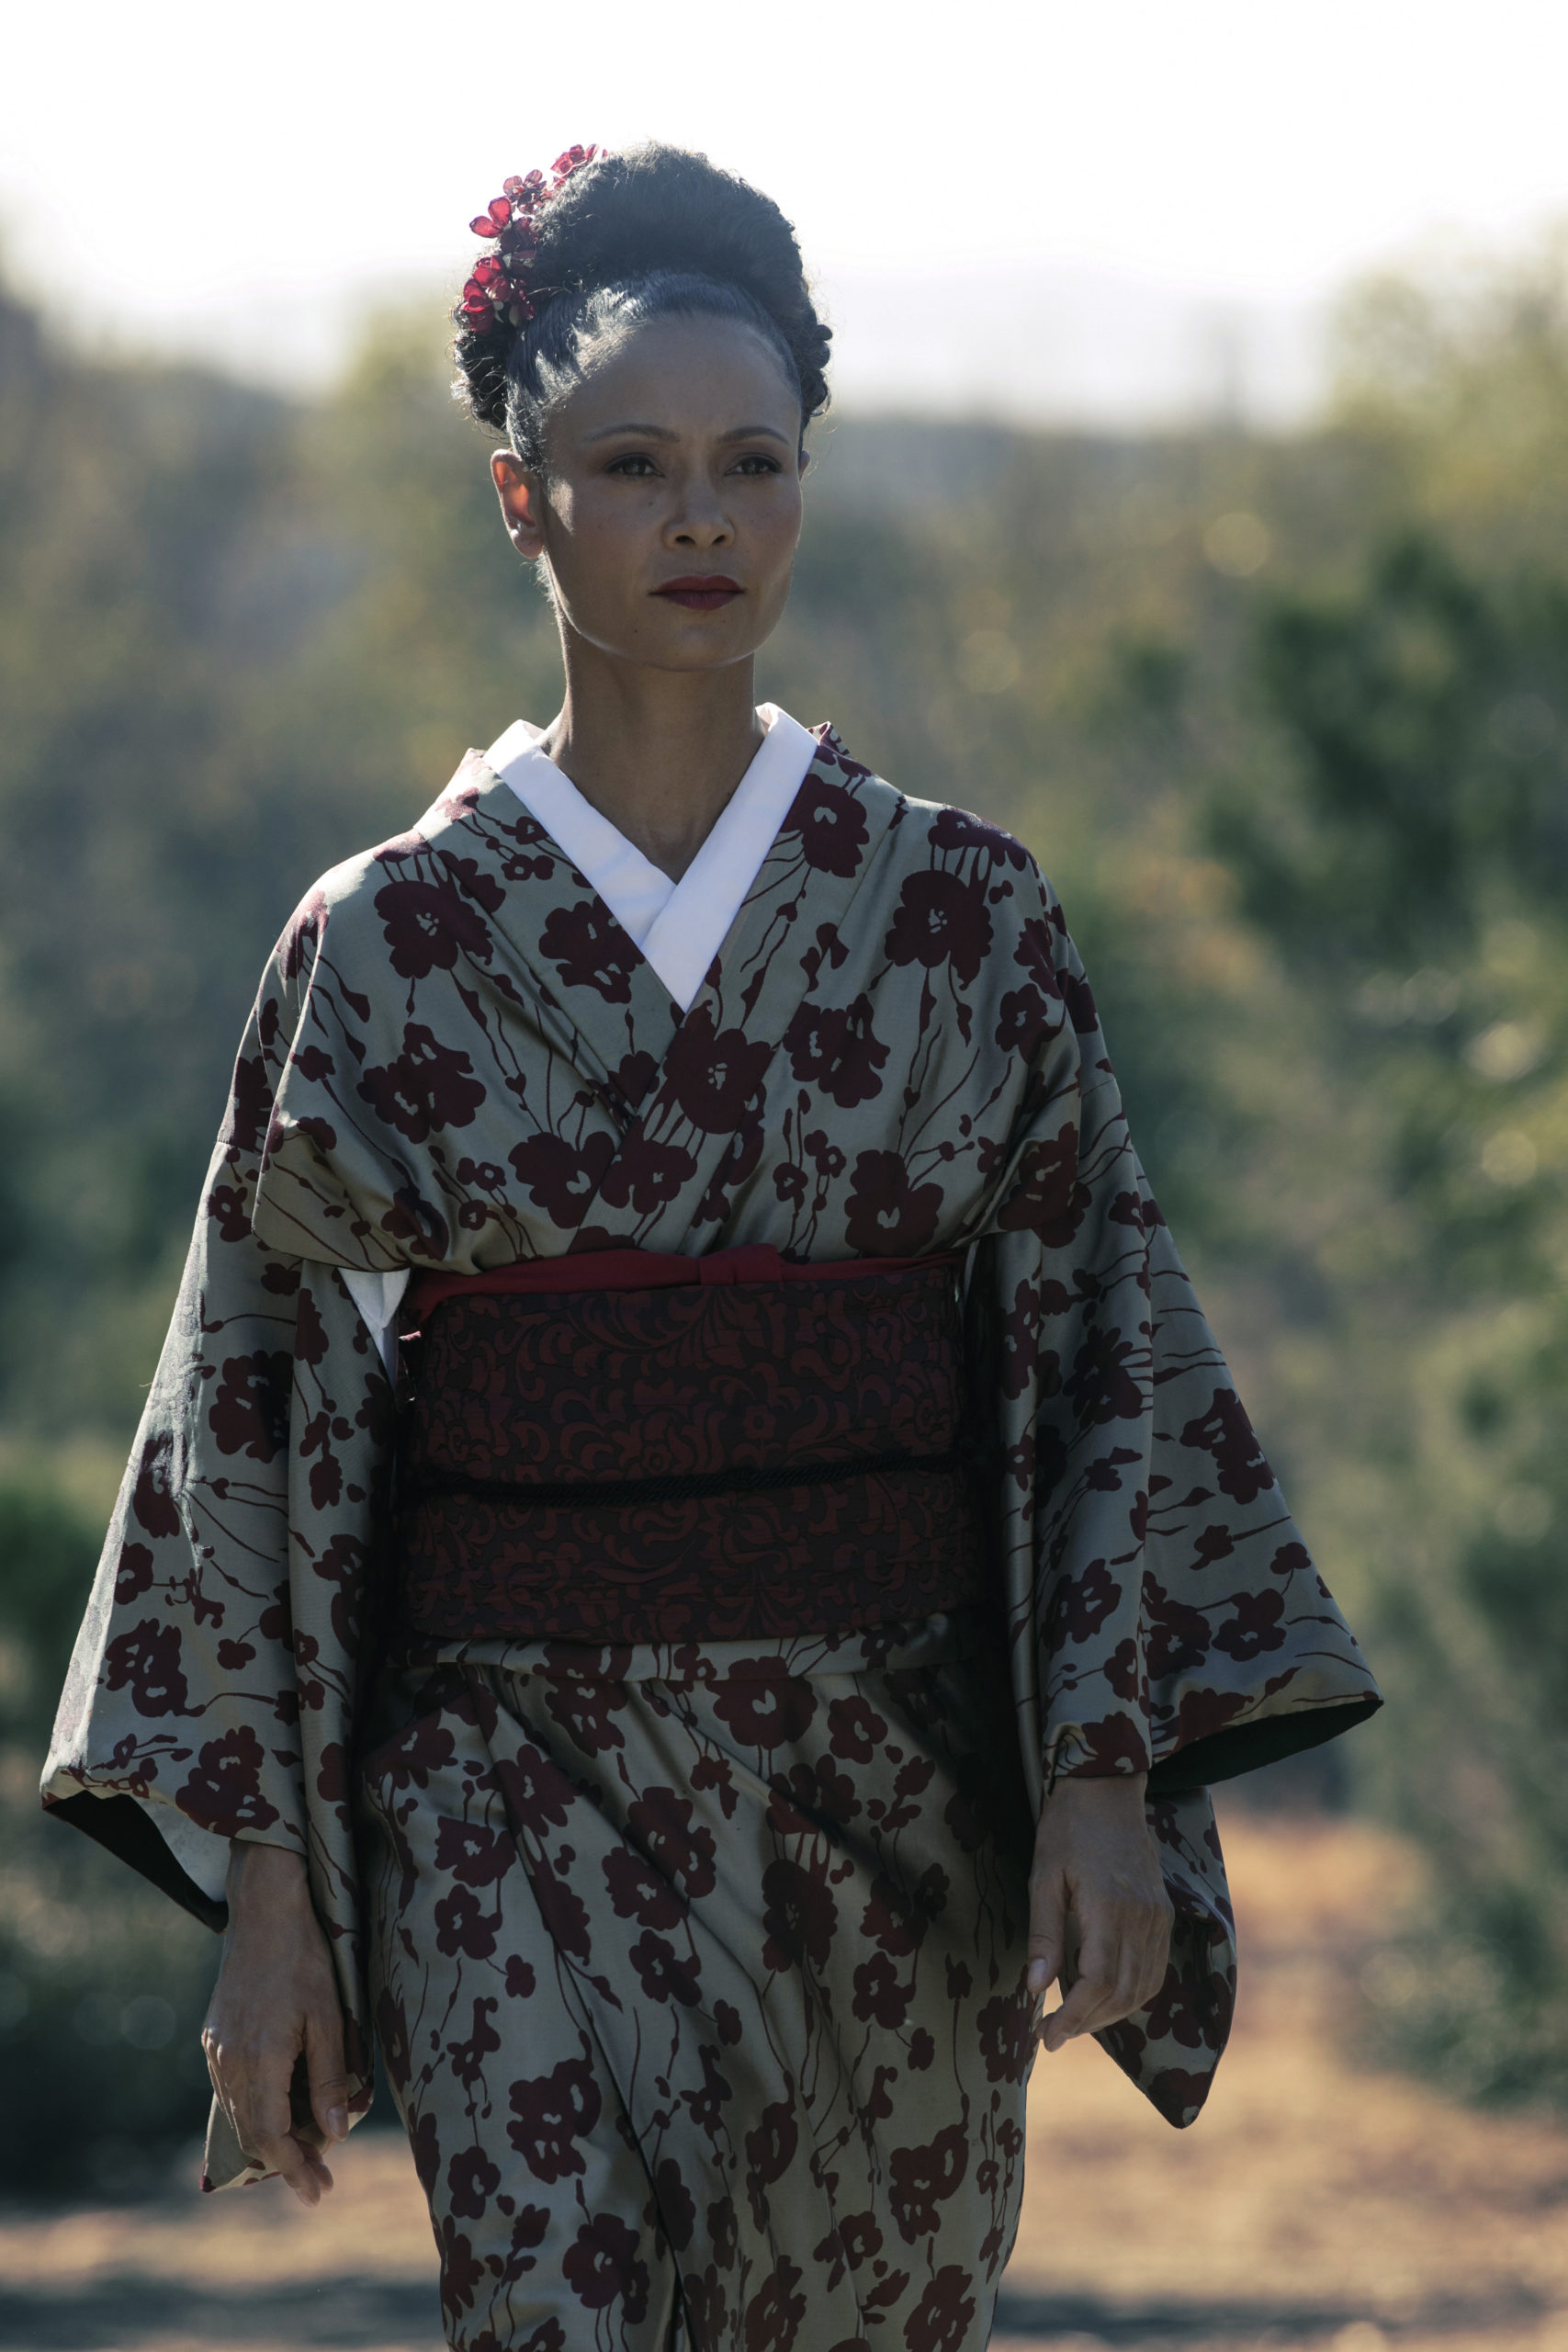 Westworld’s Shōgun World Was Everything I Expected It To Be, But Not Much Else